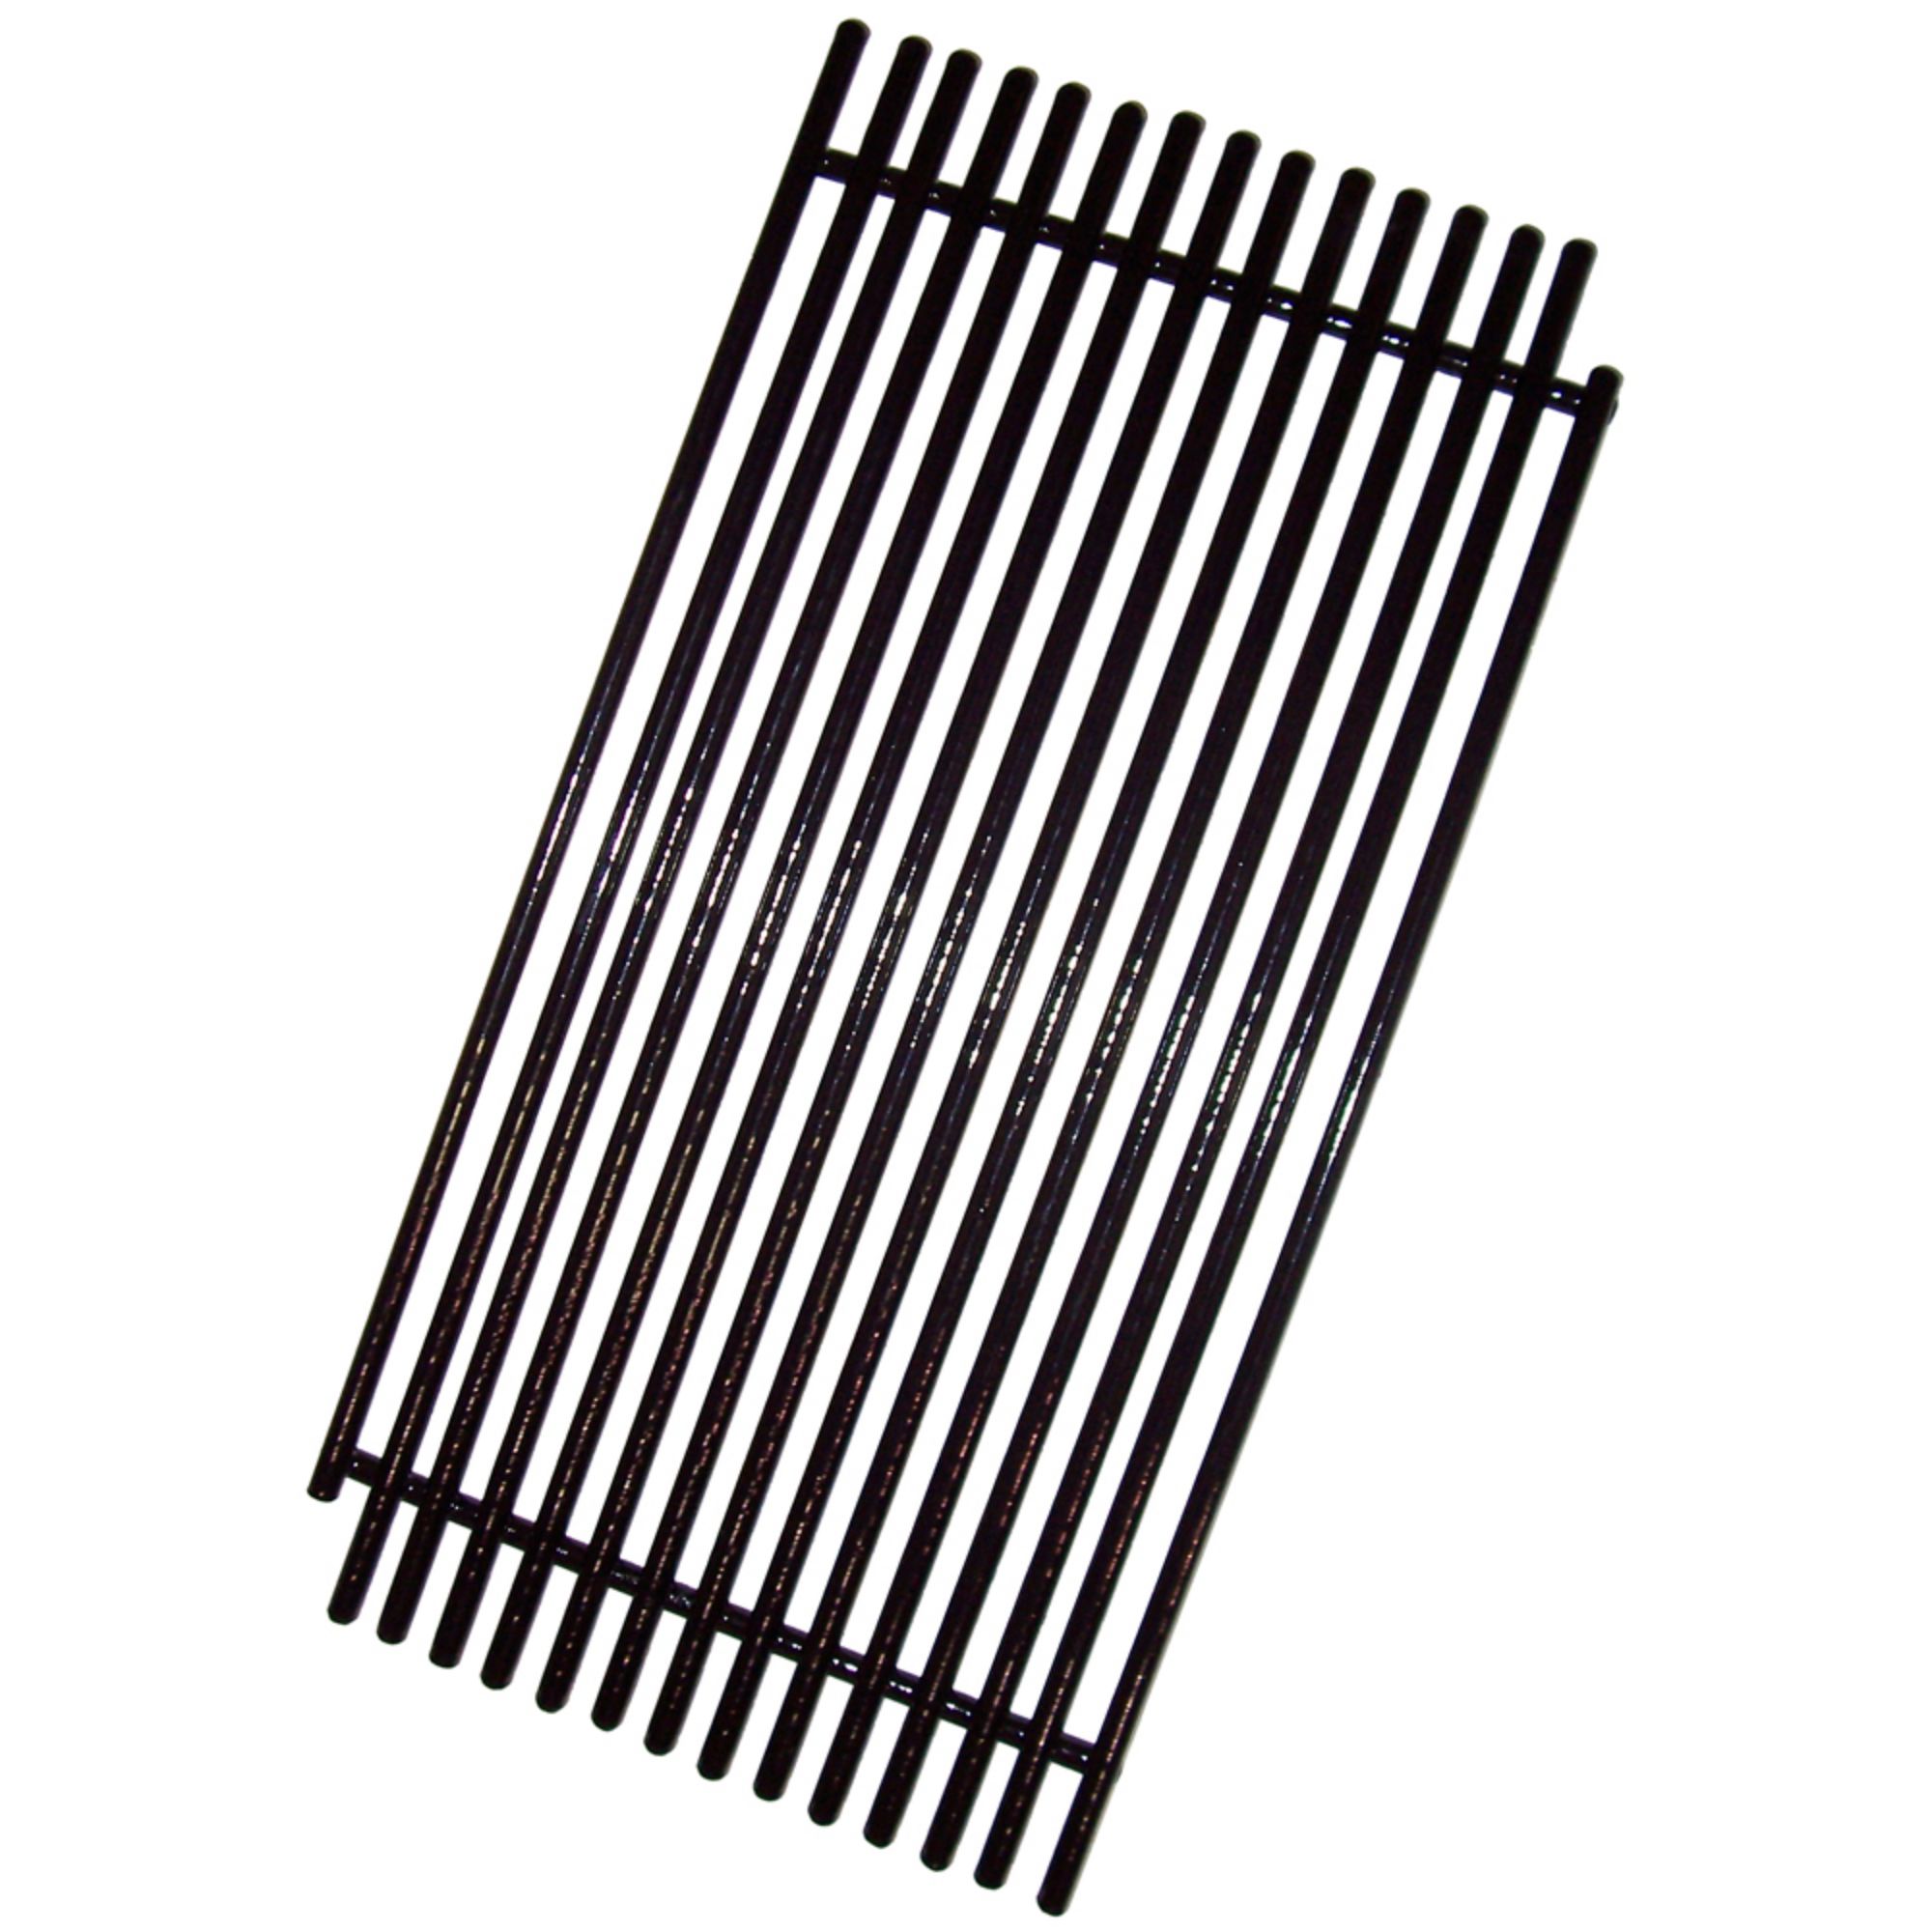 Porcelain steel wire cooking grid for DCS brand gas grills